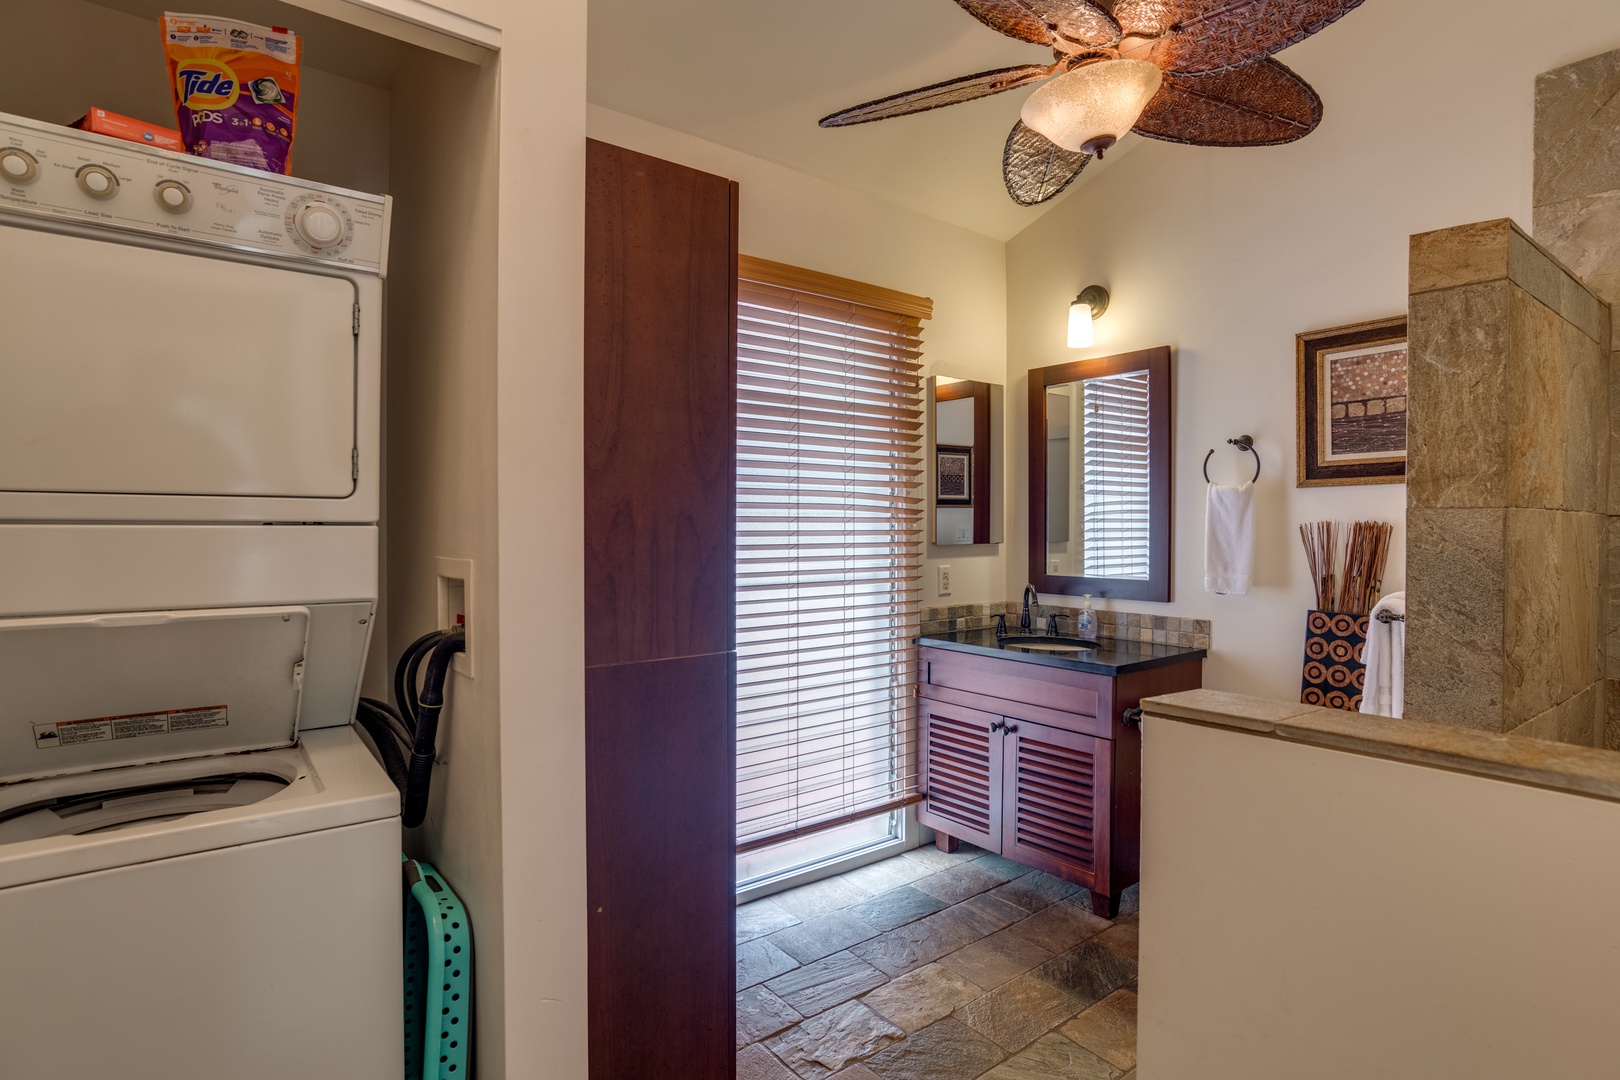 Lahaina Vacation Rentals, Aina Nalu I201 - Guest bathroom, washer and dryer